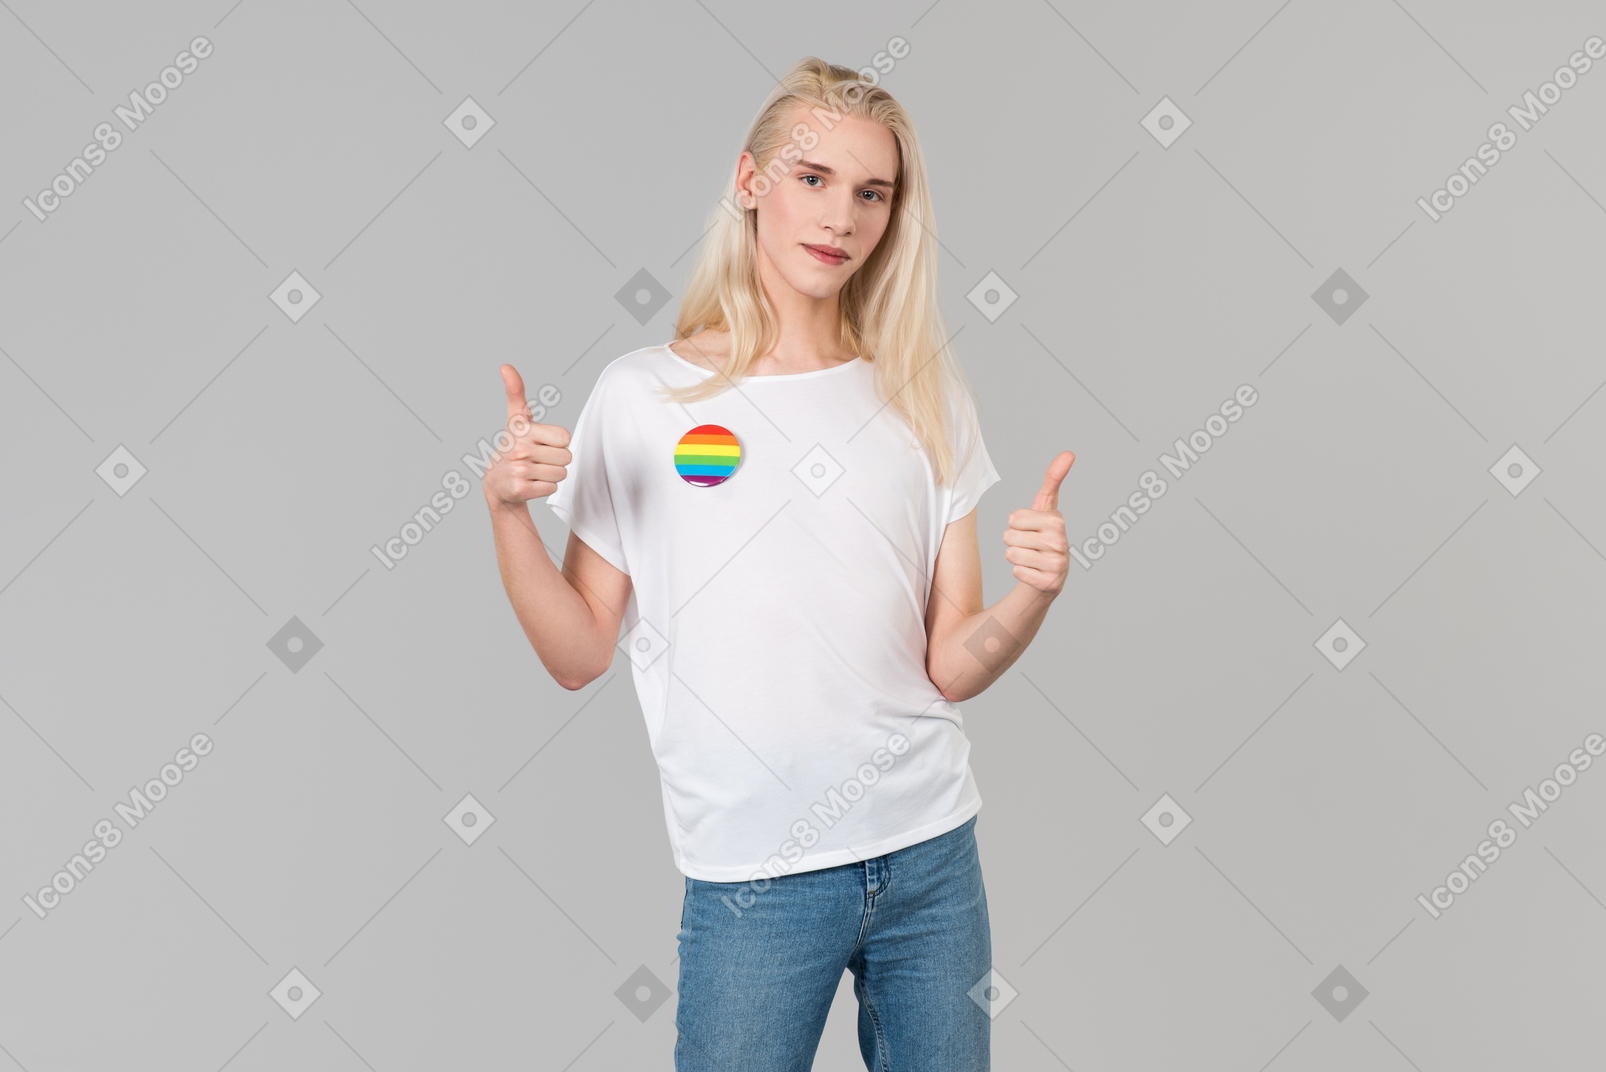 Good-looking young man with long blond hair, standing against grey background, wearing blue jeans and a white t-shirt with lgbt badge on it